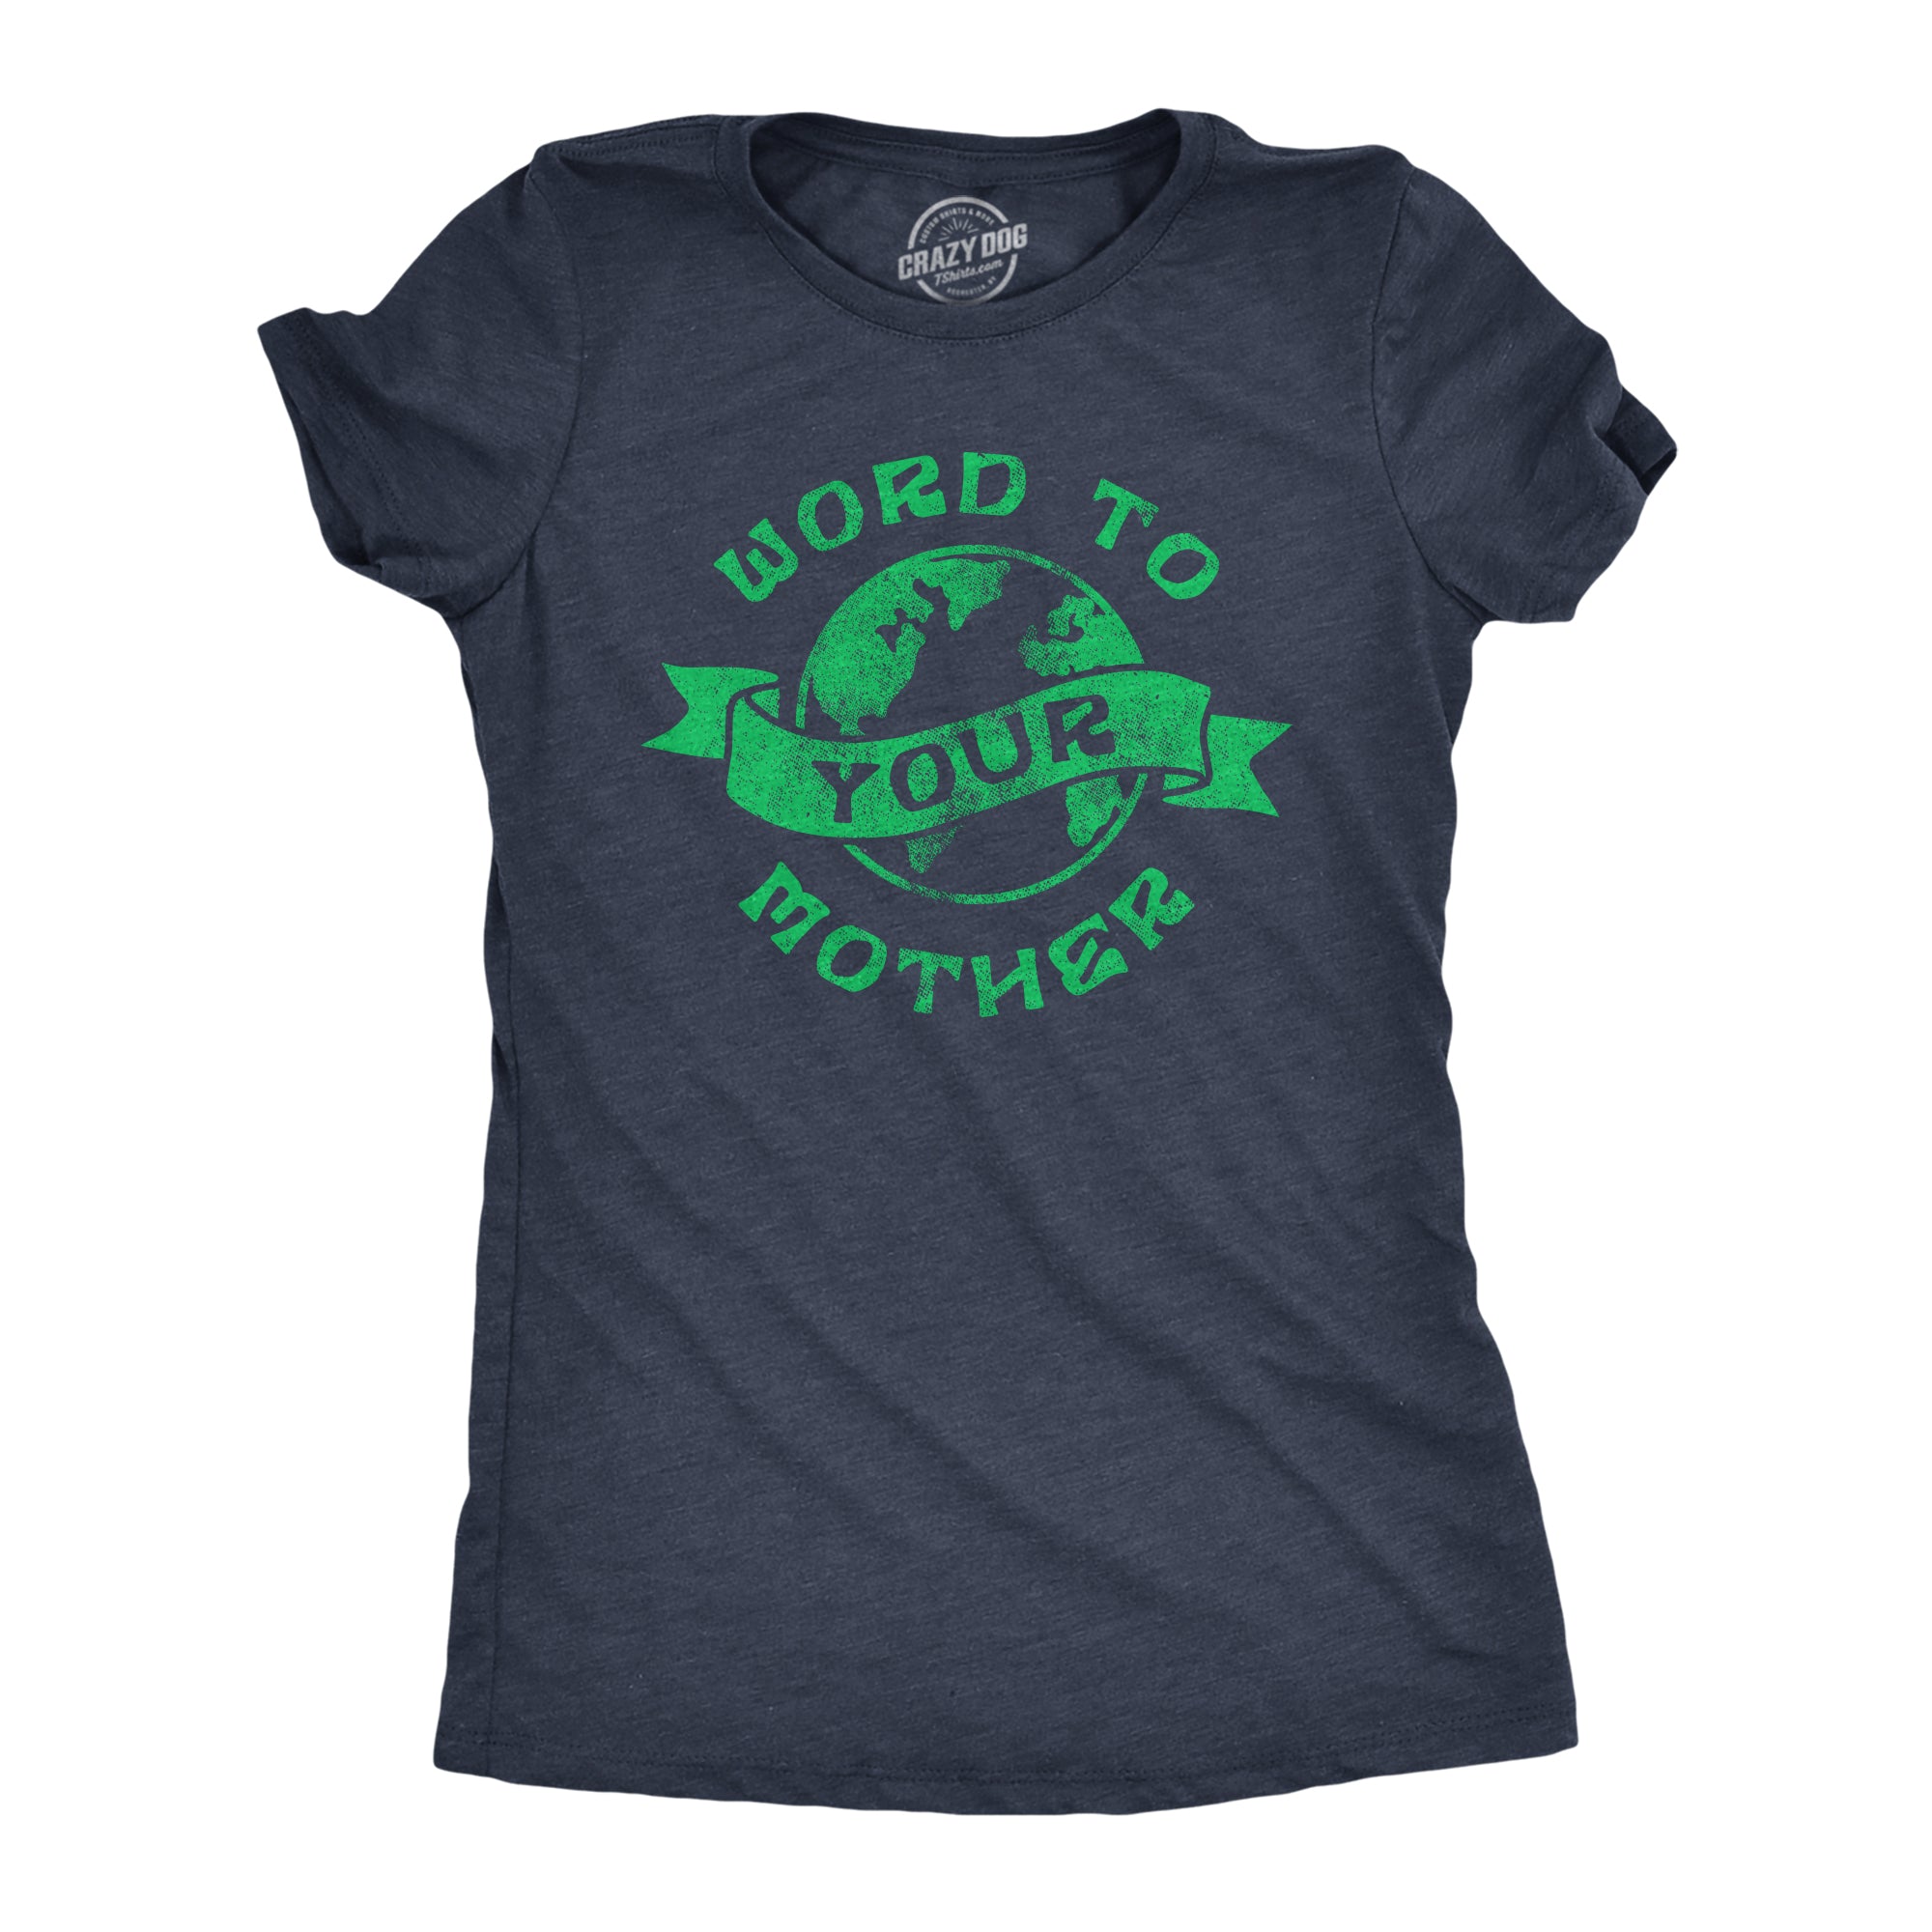 Funny Heather Navy - Word Mother Word To Your Mother Womens T Shirt Nerdy Earth Sarcastic Tee